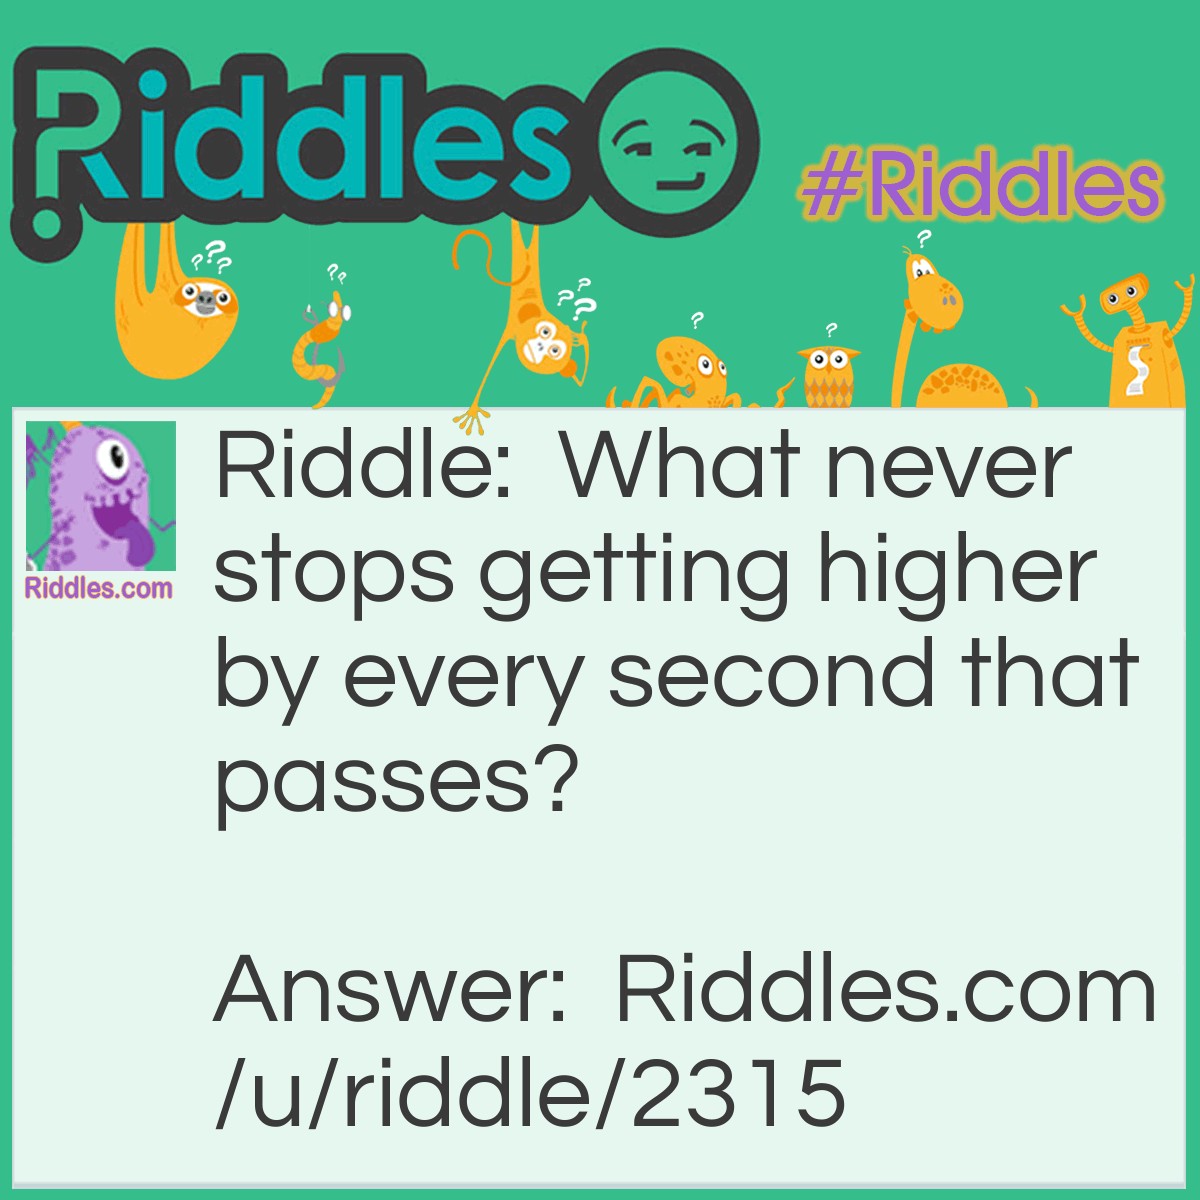 Riddle: What never stops getting higher by every second that passes? Answer: Your age.